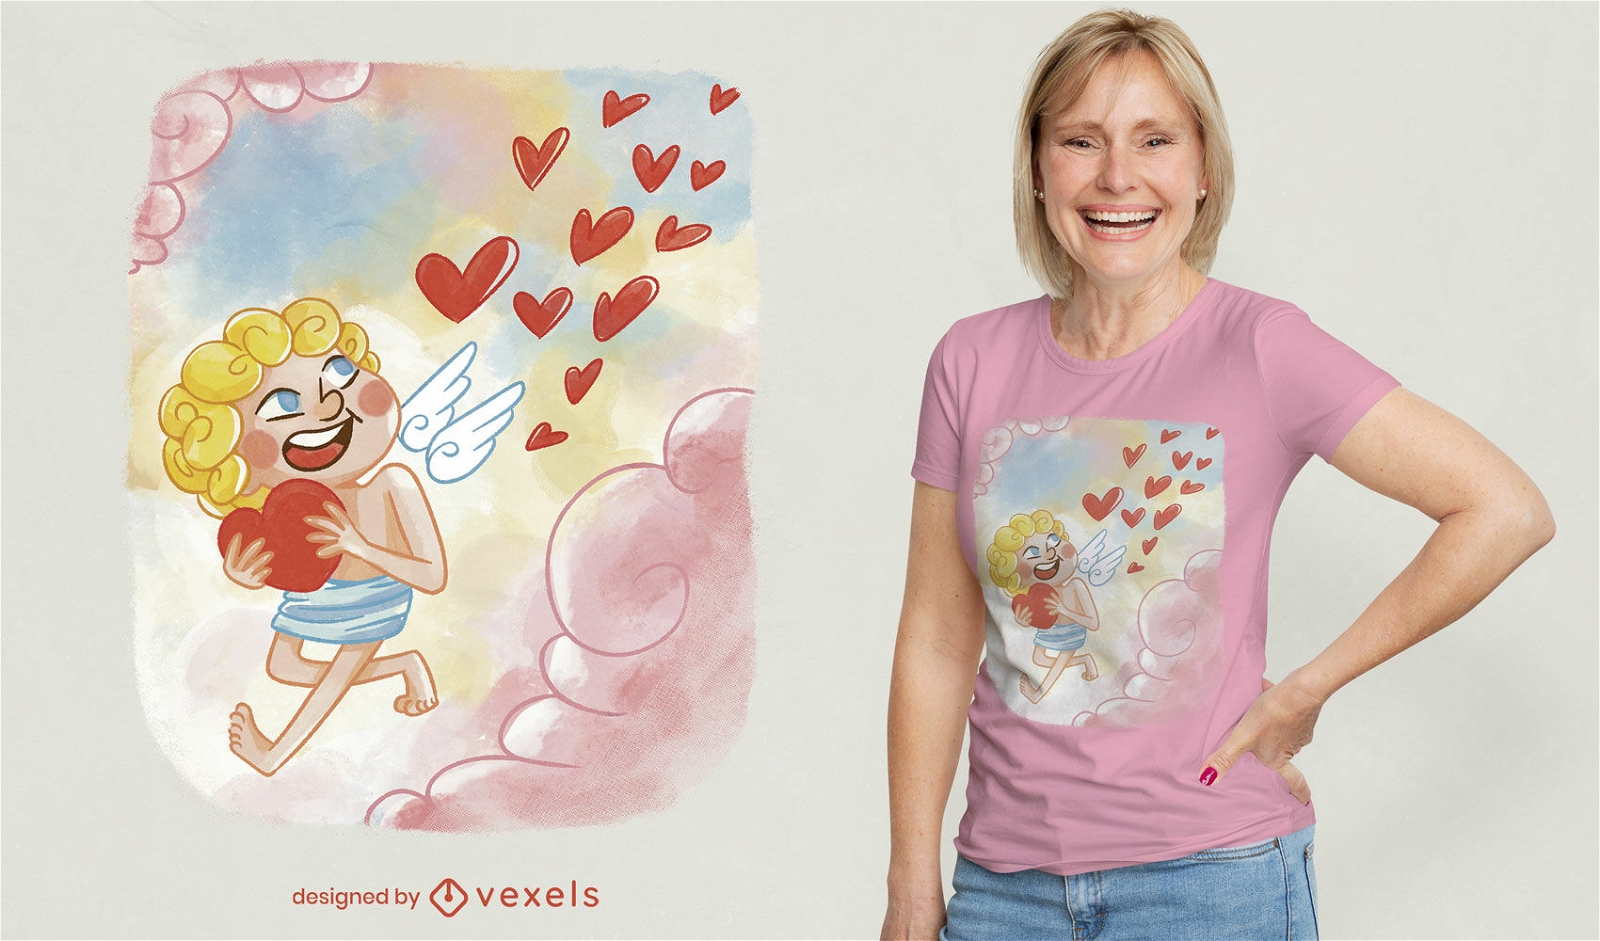 Cupid holding heart valentines day t-shirt psd